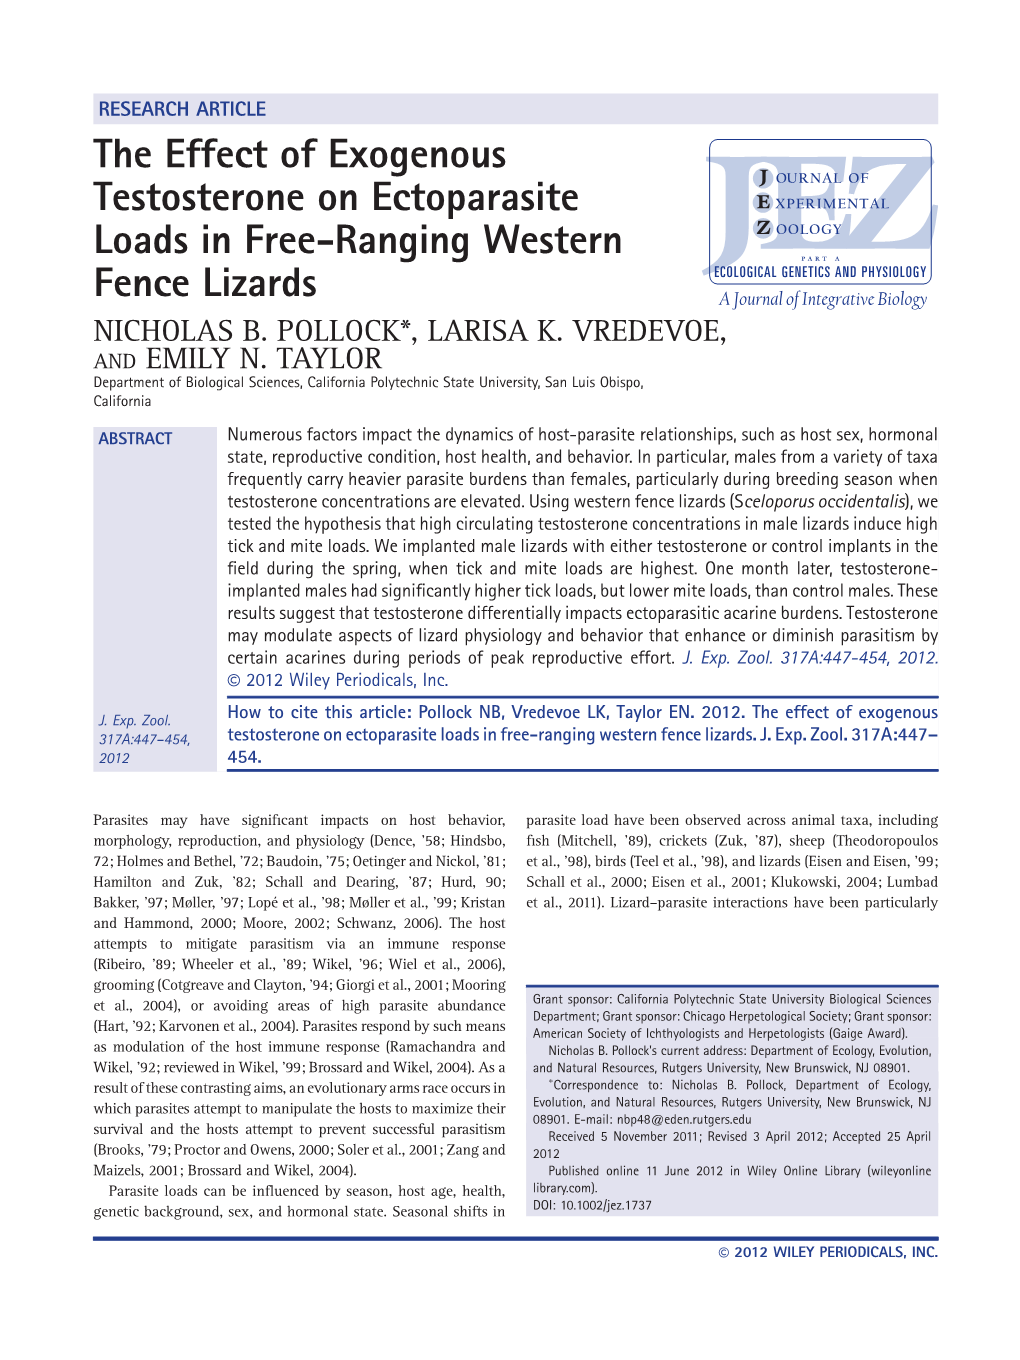 The Effect of Exogenous Testosterone on Ectoparasite Loads in Freeranging Western Fence Lizards